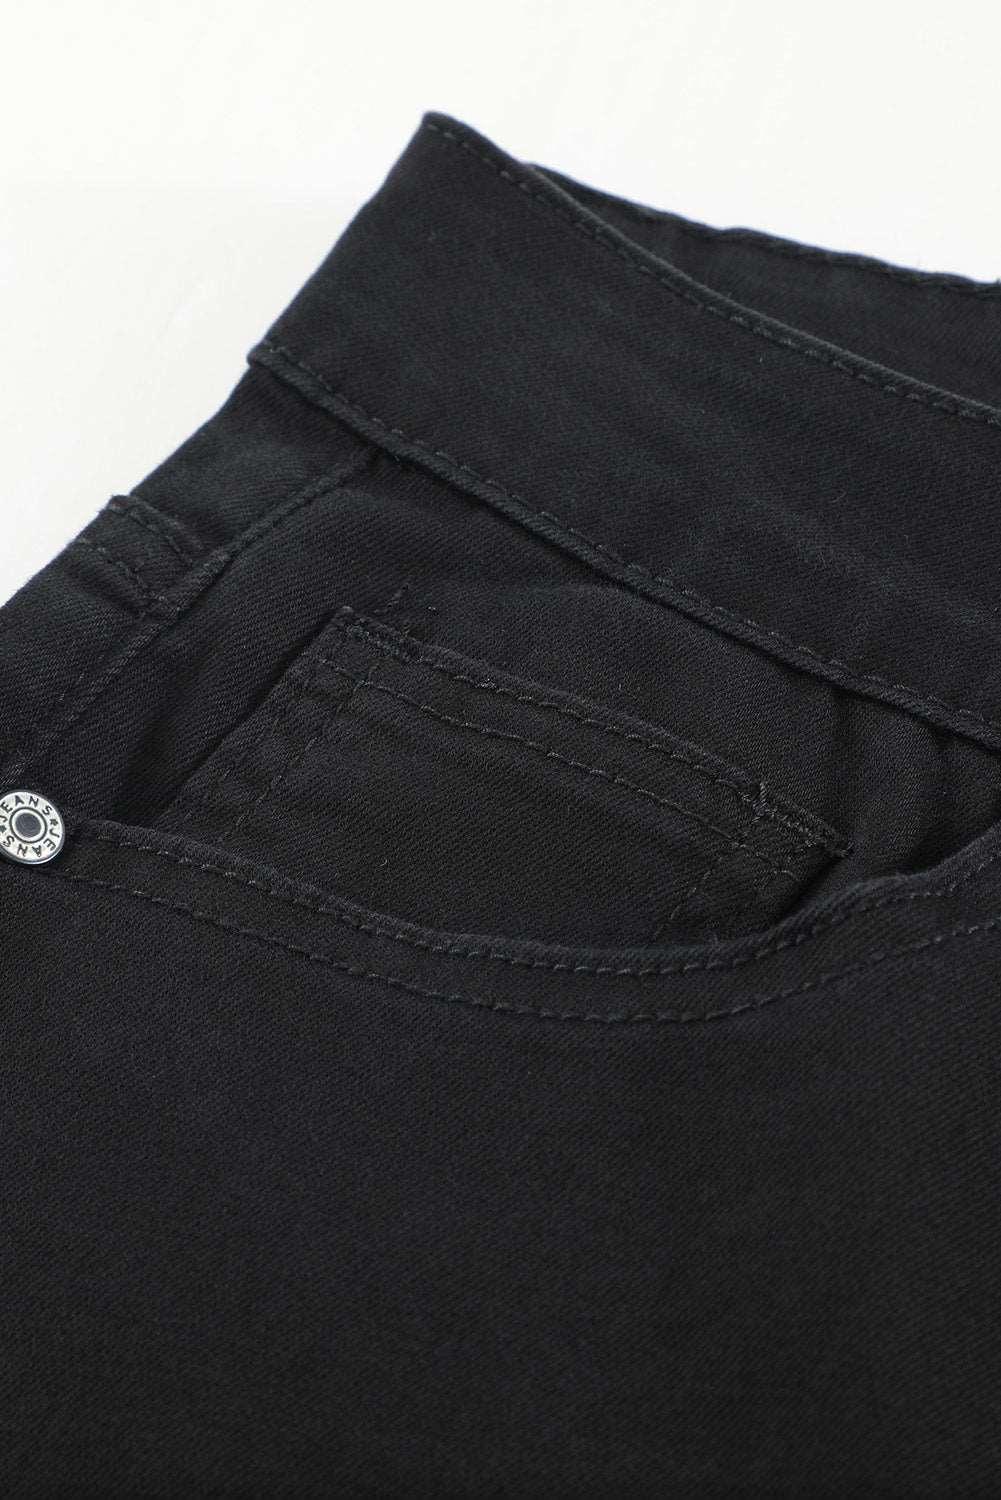 Black Buttons Frayed Cropped High Waisted Jeans - Vesteeto